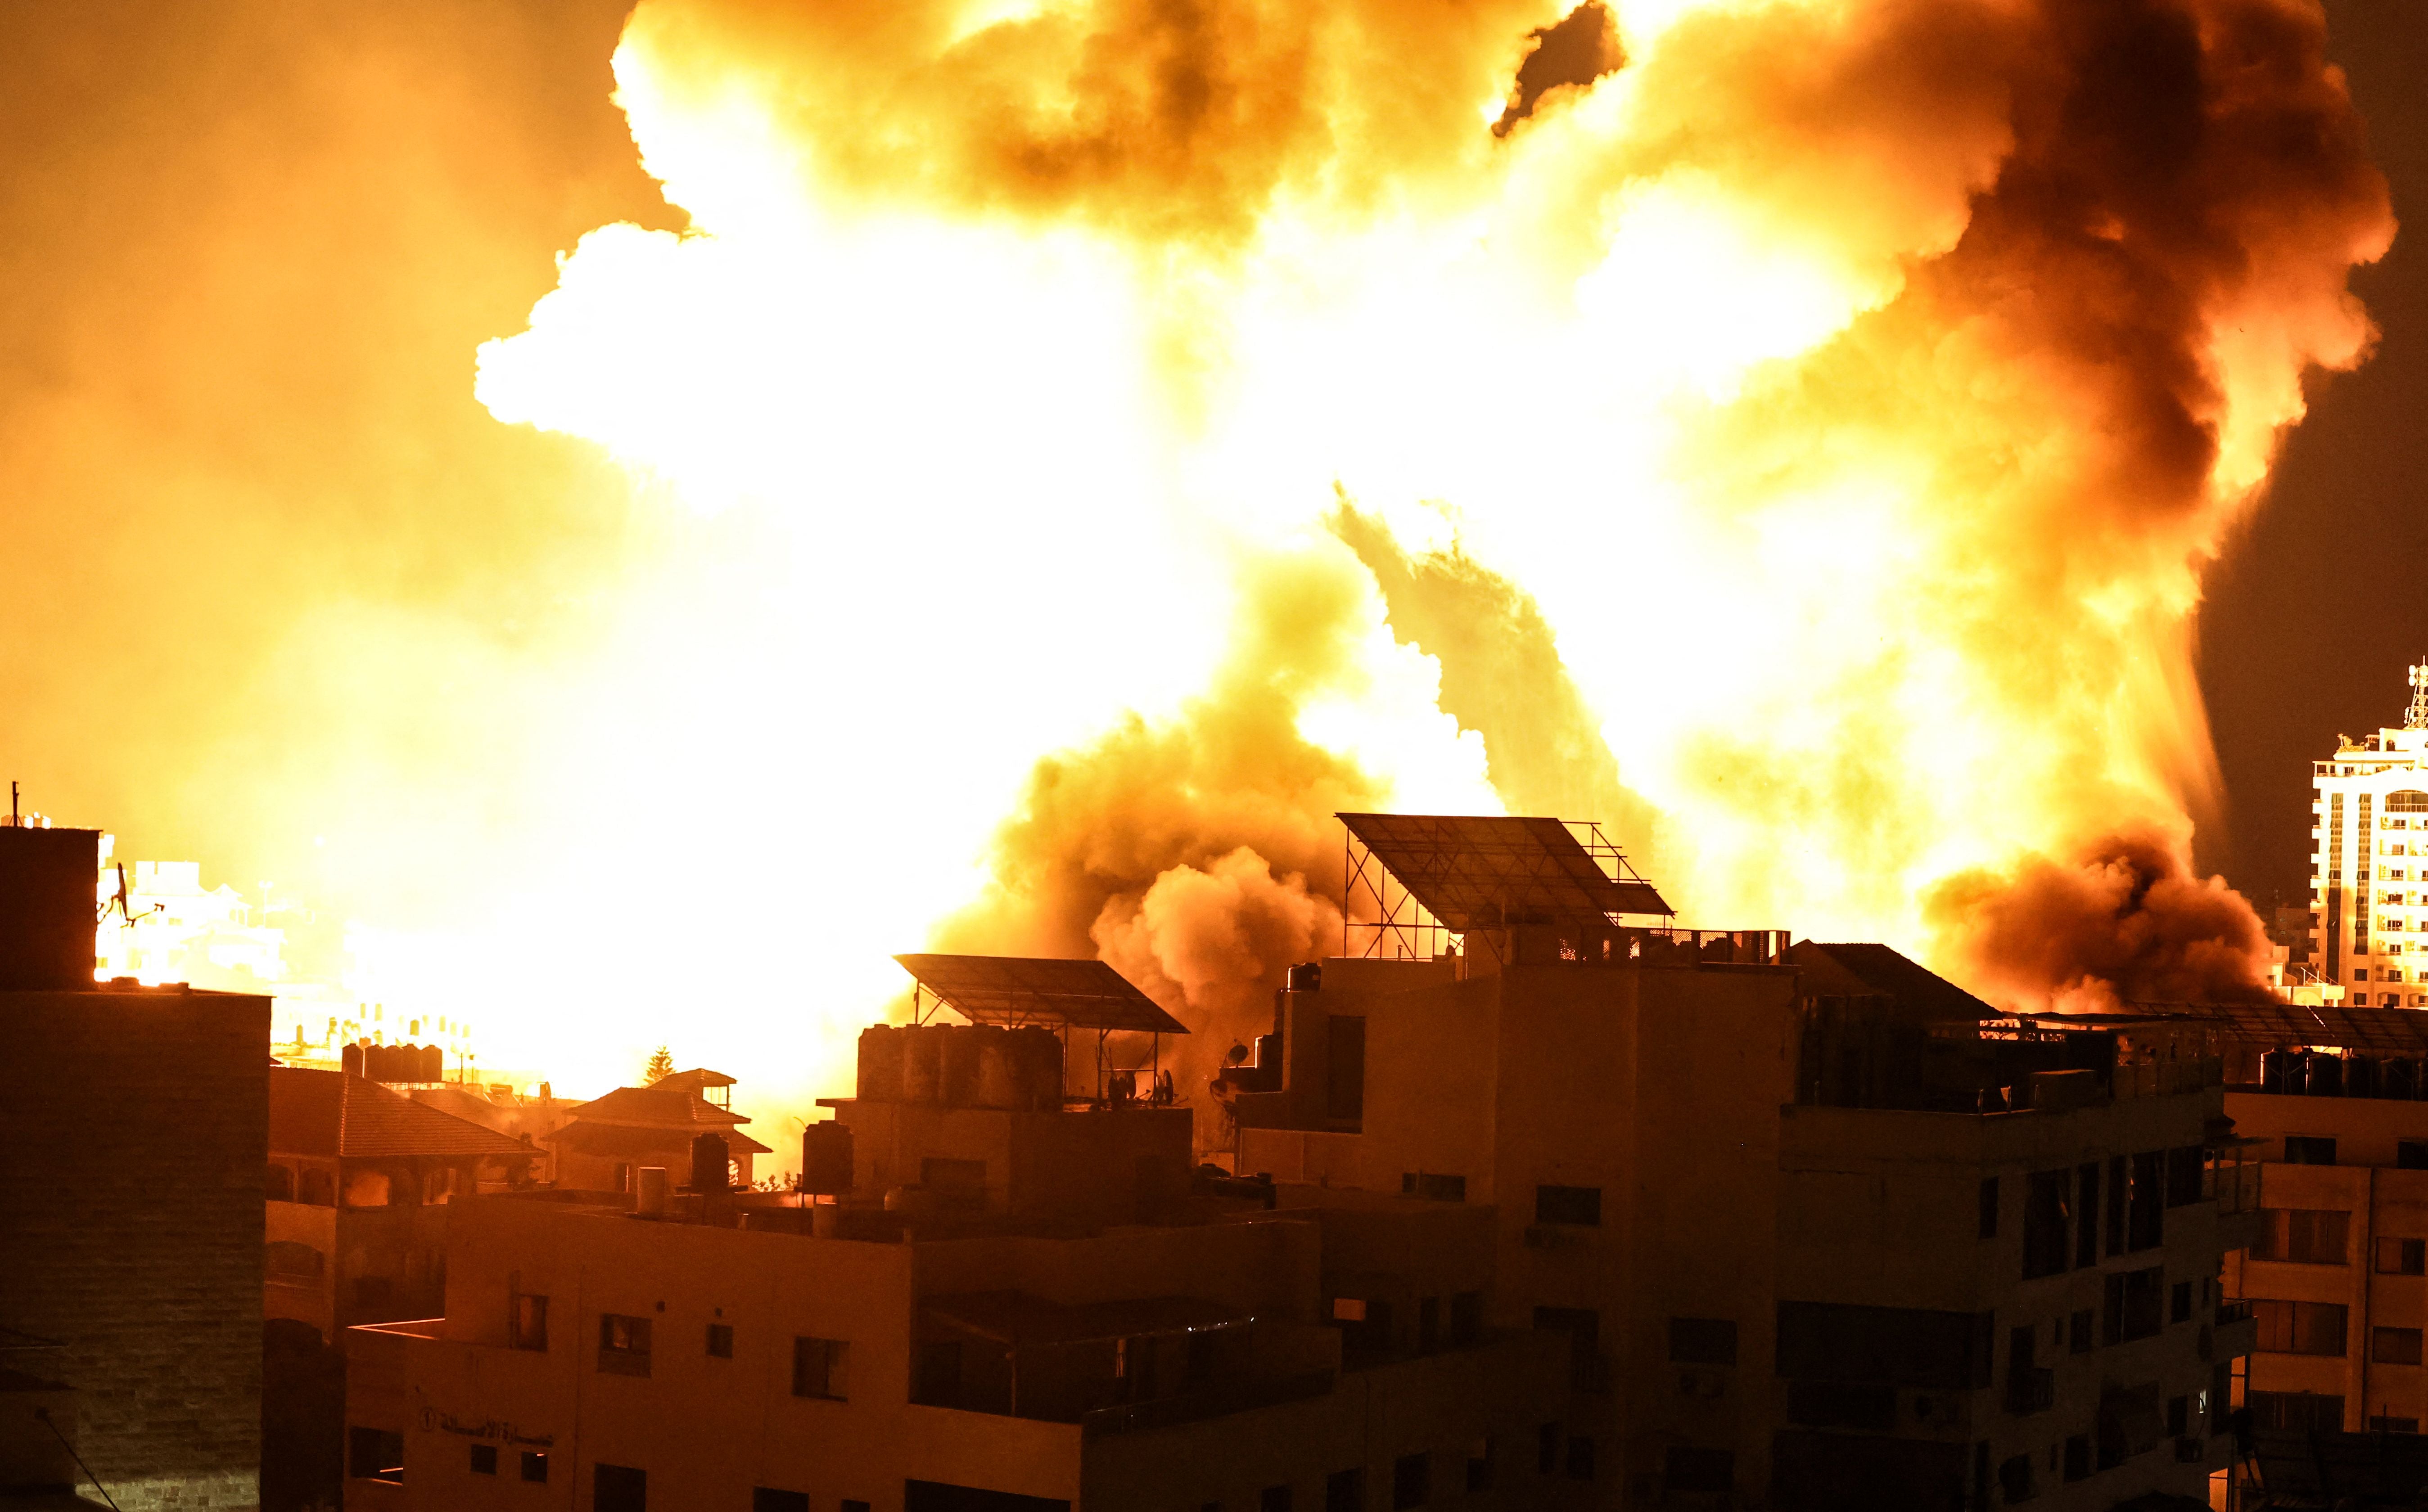 A ball of fire explodes above buildings in Gaza City as Israeli forces shell the Palestinian enclave, early on May 18, 2021